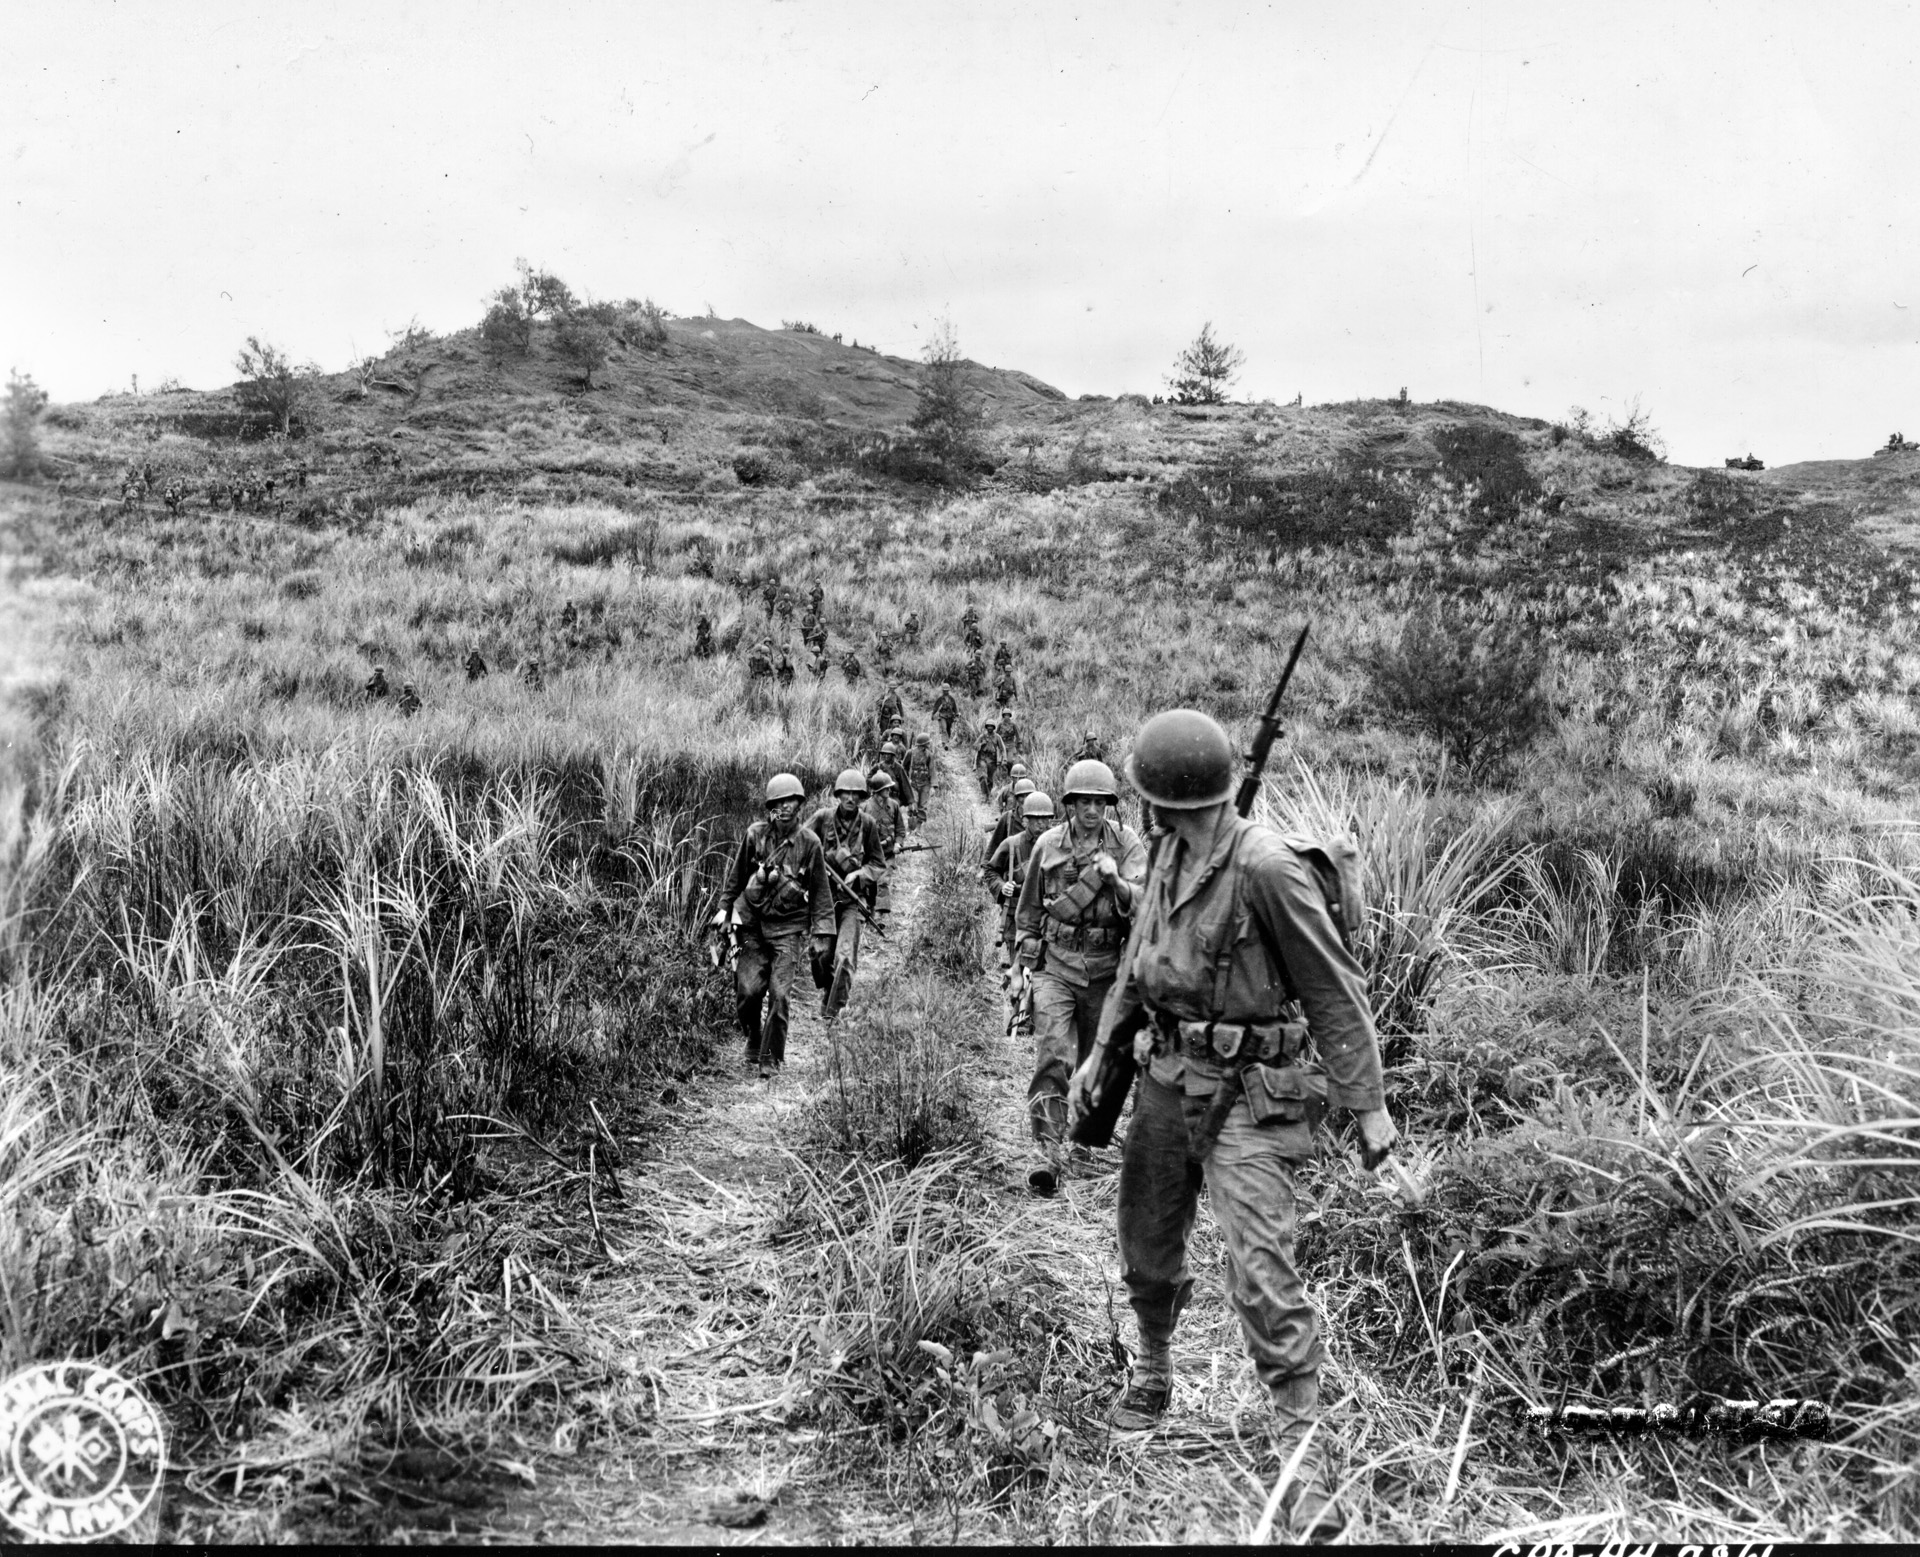 A patrol of the 77th Infantry Division makes its way along a dirt path on the island of Guam in the Marianas in the summer of 1944. The capture of Guam was a key event in the securing of the Marianas for forward air bases from which American heavy B-29 Superfortress bombers could strike the Japanese home islands.